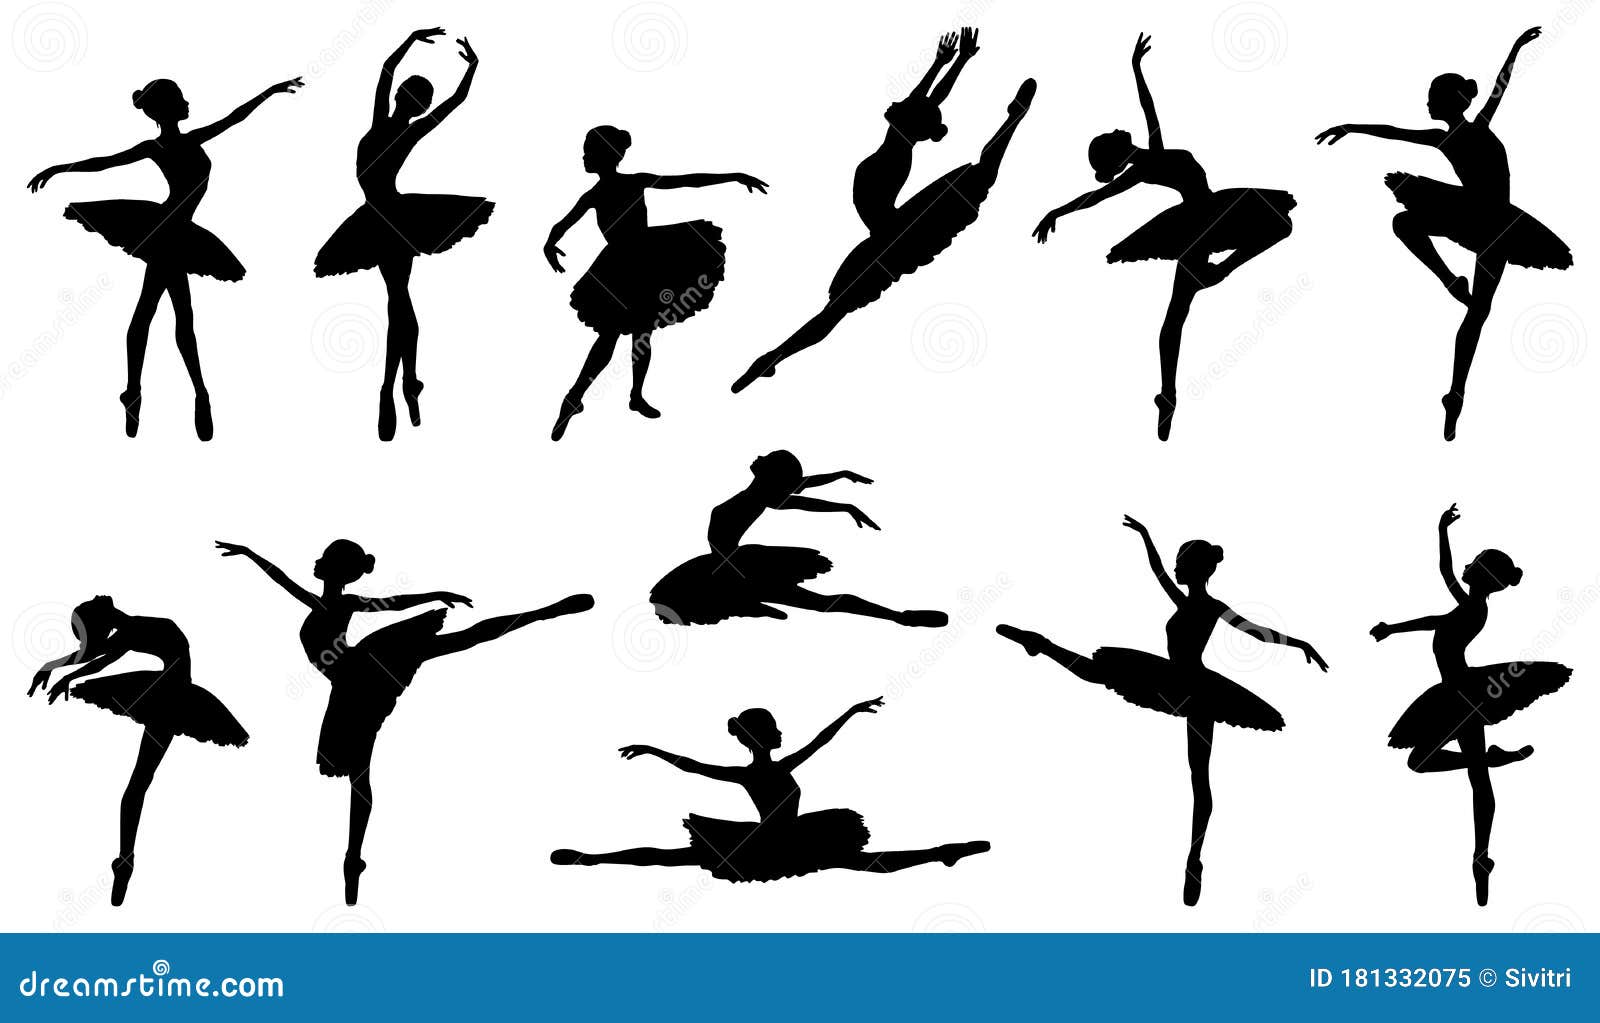 Dancing Silhouette PNG And Vector Images Free Download - Pngtree